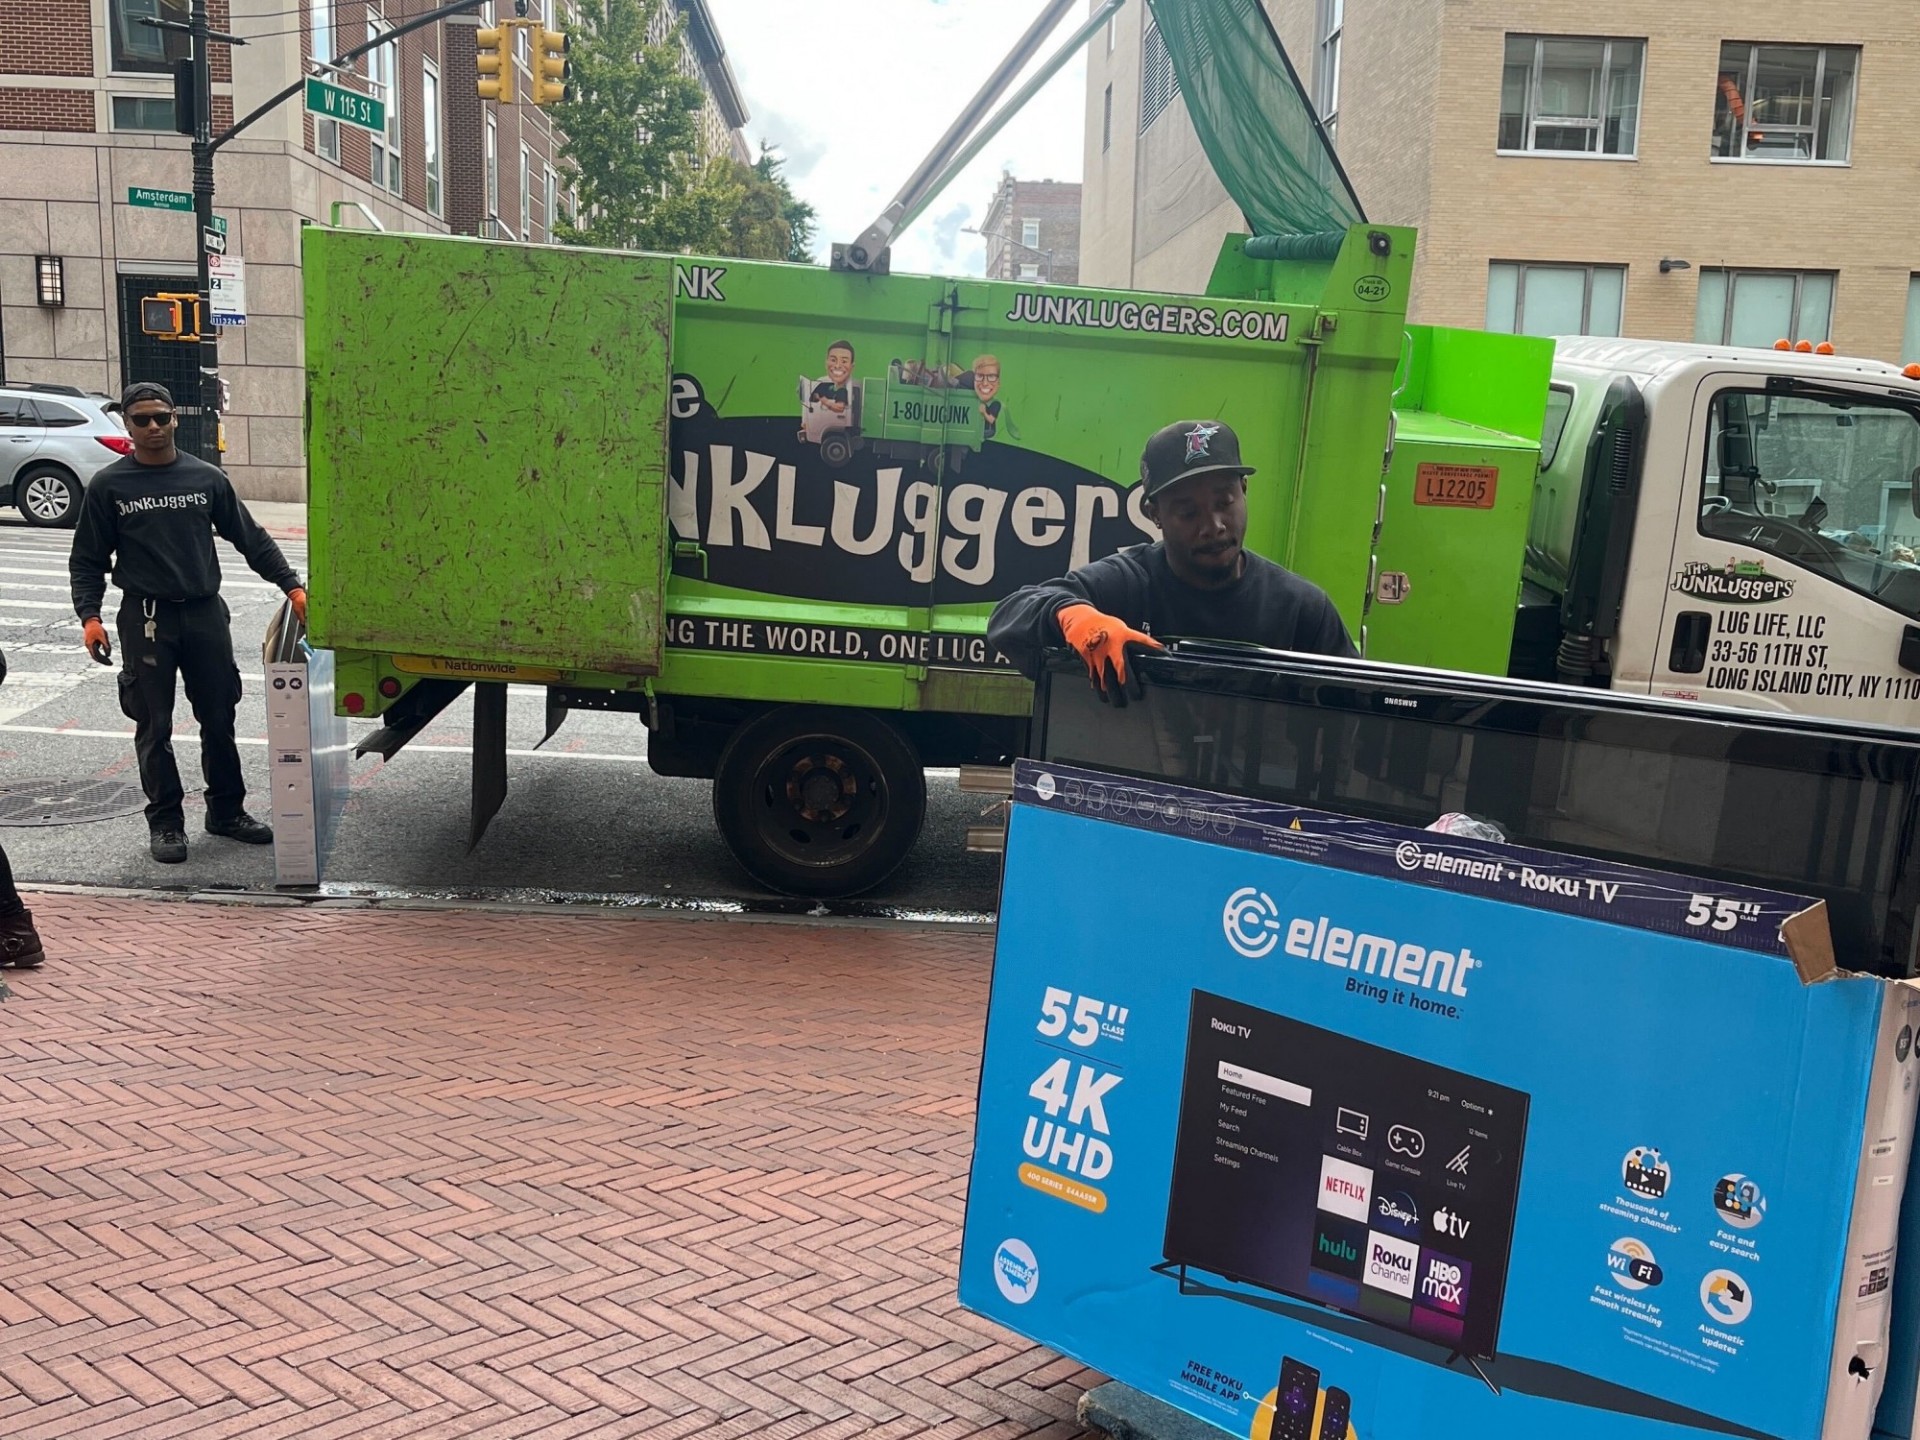 Junkluggers employees loading a gently-used 55 inch TV into a truck.